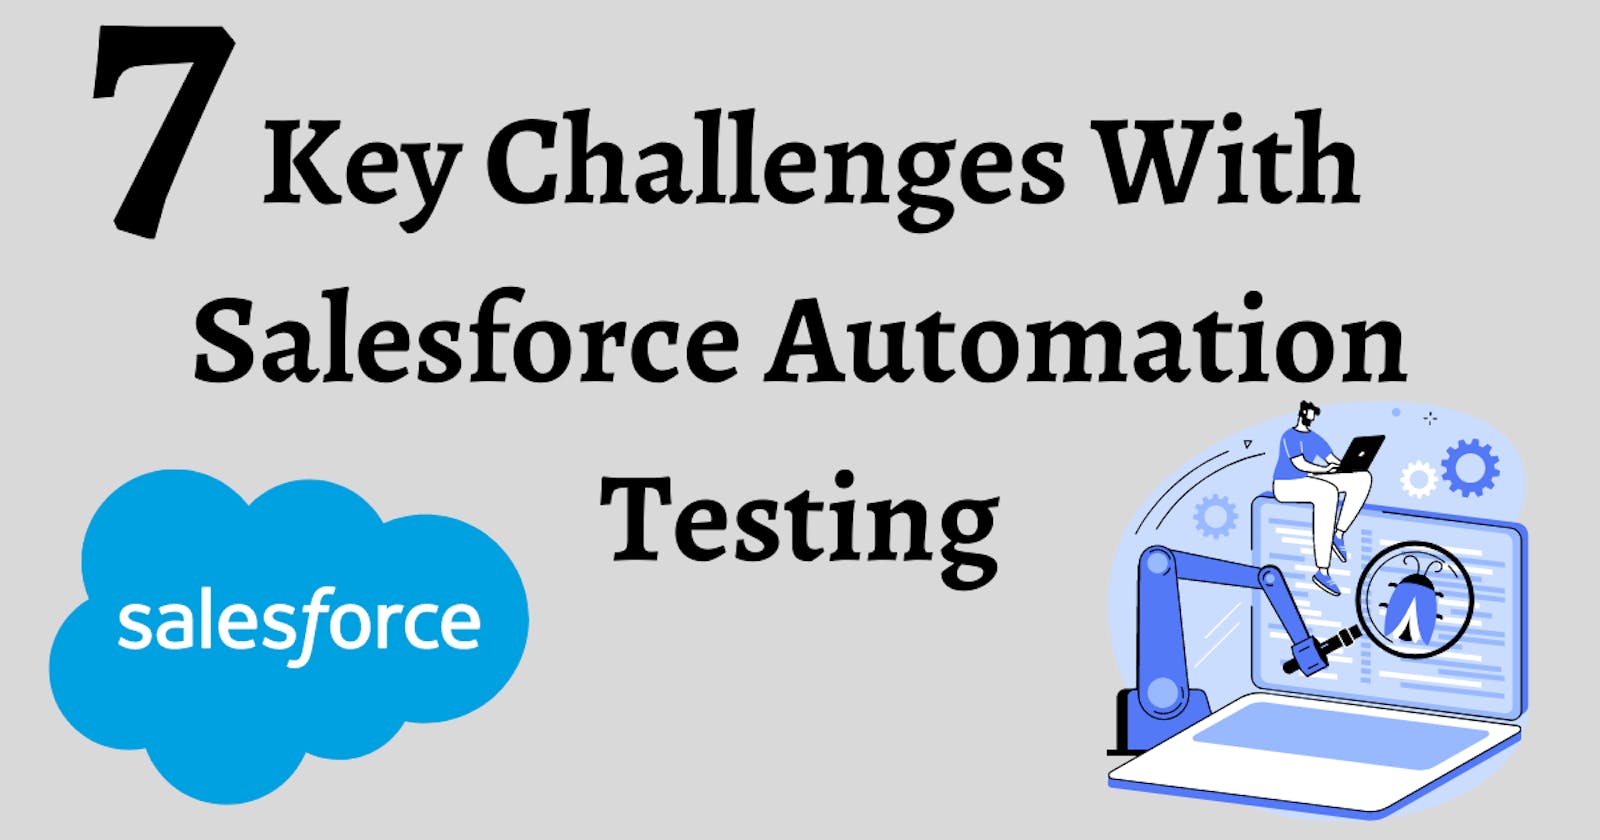 7 Key Challenges With Salesforce Automation Testing